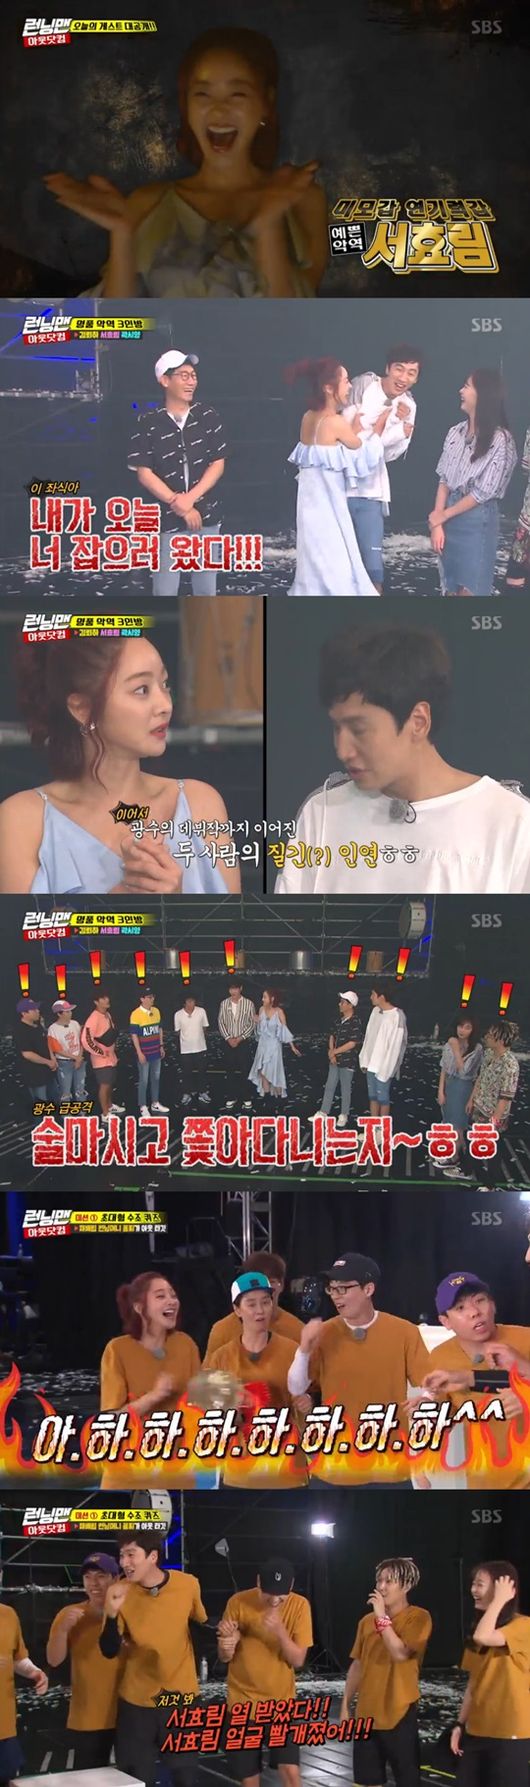 Seo Hyo-rim, who appeared in Running Man, attracted attention by conveying the charm of sweet salvage that Lee Kwangsoo was heard.In the SBS entertainment program Running Man broadcasted on the afternoon of the 19th, In-N-Out Burger.com featured In-N-Out Burger.com, which is a race with running money, starring 3 villains actors Kim Roe Ha, Kwak Si-yang and Seo Hyo-rim.The three villains had a special relationship with the members.Kim had met Lee Kwangsoo through The Sound of the Heart and said to Lee Kwangsoo, I had such a good luck.This was the first time this Friend was there, he laughed. Kwak Si-yang also had a face with the members of the entertainment industry, Running Man.Seo Hyo-rim recalled a special first meeting with Lee Kwangsoo, who have been in a relationship since their debut, between longtime friends.Seo Hyo-rim grabbed the neck of Lee Kwangsoo, who was blazing at him, and laughed, saying, I came to catch you today.I once gave a prize to Mr. Kwangsoo, who informed his face with AD before he made his debut, I was the prize winner, Mr. Kwangsoo, said Seo Hyo-rim.Seo Hyo-rim, who had taken a sitcom with Lee Kwangsoo, surprised everyone by revealing to Lee Kwangsoo, I was so drunk and chasing at that time.The members said, Did you do that at that time?Seo Hyo-rim, who was looking at Lee Kwangsoo and looked at it happily, said, I did it in the play. He laughed at Lee Kwangsoo.Lee Kwangsoo was forced to be helpless by the Seo Hyo-rim.But there was also a sweet chemi.Seo Hyo-rim shouted at the speed quiz on Lee Kwangsoo when Lee Kwangsoo had to do three things when he was jealous: When you look at another woman, when you are acting well, when you are making better money than me.Why are you jealous when you look at another woman? When the pinky suspicion occurred, Seo Hyo-rim replied, I am a man, but if you are a man, you should see me.Also when asked about Lee Kwangsoos sleeping habits, Seo Hyo-rim shouted out loud, Nostalgia, teeth go, cuddle and sleep.The members of Running Man who have slept with Lee Kwangsoo have been aware of Lee Kwangsoos sleeping habits accurately. This is all right.How do you know that? he said, surprised.Seo Hyo-rim explained, I watched it while shooting a sitcom, but the pink glow circled between the two in the appearance of Seo Hyo-rim, who even knew Lee Kwangsoos sleeping habits.In Race, Seo Hyo-rim reveals the wild charm.He worked hard to calculate and spent 200,000 won on buying Ji Suk-jins name tag, and gave a reversal to trick Ji Suk-jin to surprise In-N-Out Burger.But because of this, he was immediately targeted and laughed as a fugitive.Seo Hyo-rim chased Yang Se-chan and was mistaken as a designer, but he said, It would be fun to follow that Friend.Seo Hyo-rim, who has heard Lee Kwangsoo and has been running Running Man, immediately took the top spot in real-time search terms on portal sites and stood at the center of the topic.The unique character of the pure but victorious Seo Hyo-rim was enough to give viewers a laugh.Capture the Running Man broadcast.